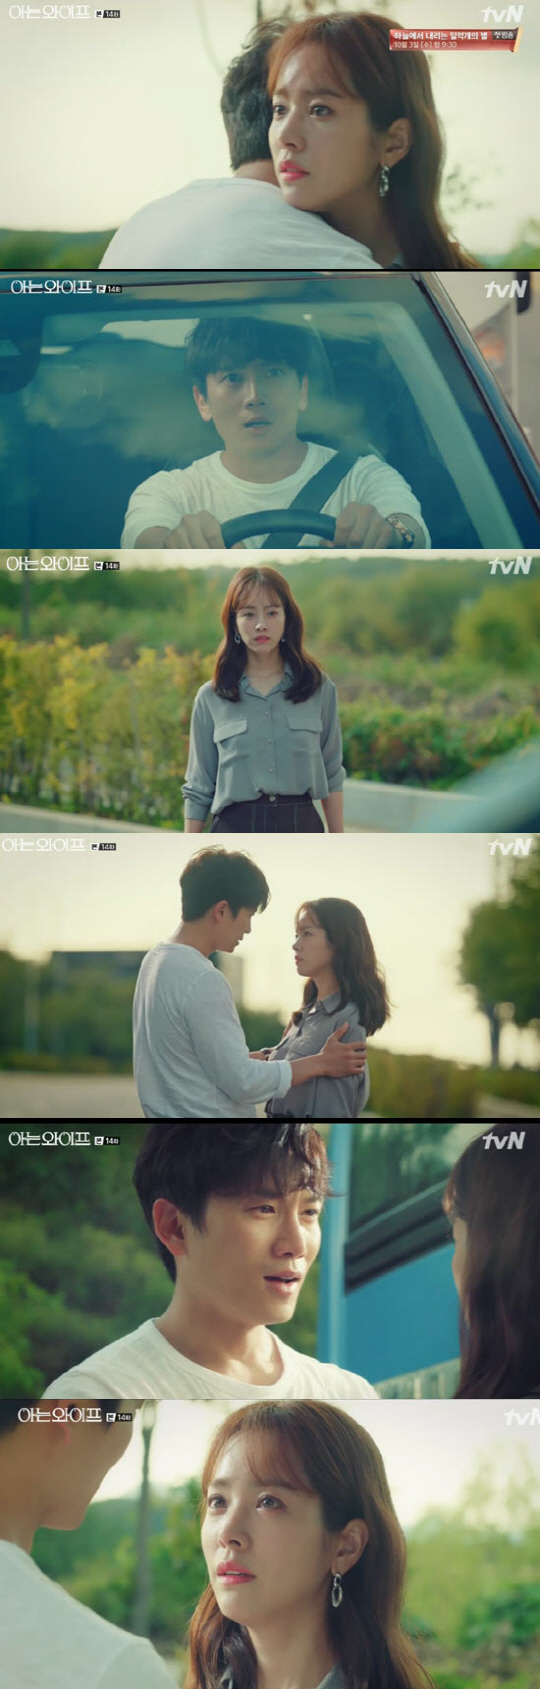 One thing is, I love you. Ill make you happy. I promise.Ji Sung reaps iron wall and Confessions love for Han Ji-minIn the TVN drama Knowing Wife, which was broadcast on the 13th, changes in the relationship between Seo Woo Jin (Han Ji-min) and Cha Ju-hyuk (Ji Sung) were spread.Cha Ju-hyuk continued his life of not loving anyone, imprinting himself unhappily on his married opponent.But Seo Woo Jin, who came to his point, went straight to Cha Ju-hyuk.Cha Ju-hyuk smiled and greeted Cha Ju-hyuk, holding his hand as if to hand over coffee to Cha Ju-hyuk, saying, I would like to ask you for your help in many ways. Cha Ju-hyuk smiled awkwardly as if he were conscious of the surroundings.Cha Ju-hyuk pressed Seo Woo Jin, who persistently followed him, Why do you do this? Why do you want to be happier than a better man?However, Seo Woo Jin confirmed his mind that I can do well from now on.Seo Woo Jin approached the staff of the Gahyeon store who did not remember him at all.It was not difficult to get acquainted with Seo Woo Jin, who already knows their tastes.Cha Ju-hyuk handled it flexibly as what had already gone on and happened, especially the piggy bank throwback of a female customer trying to hit Seo Woo Jin on the head, which also blocked her head.Thankful Seo Woo Jin followed him on the bus, presented him with clothes; Cha Ju-hyuk caught up with the shaking heart.But Seo Woo Jin came out to Gahyeon store family members saying, I like Cha Ju-hyuk.Cha Ju-hyuk shouted really not at the party as all the staff tried to connect the two peoples relationship, and the atmosphere became cheap.See Woo Jin, who was so bitter drinking alone, chased Cha Ju-hyuk and said, I cant really do it. I thought I could try.I know what youre doing. Is this rather bothering you. Im too much of my position. Ill ask you one last time.Is it really not possible? Cha Ju-hyuk turned away from her again.Cha Ju-hyuk also pushed back Lee Hee-won (Ganghanna Boone), whom he met again.Lee Hee-won, as he did before the change, said, I used to like you before. But Cha Ju-hyuk changed, he said, You did.I did not have much eyes to see men. After leaving the place first, I left the word I am happy, do not let go of the cello. Seo Woo Jin, who was rejected by Cha Ju-hyuk and treated only as a boss, told him, After a while, I just get cool.When did we have such a time? My close sister told me that she would come to Hong Kong Bank, but my mother was caught and could not decide.Should I go? Cha Ju-hyuk said, Would not it be an opportunity to be Hong Kong Bank side?Seo Woo Jin kept Cha Ju-hyuk away; then, with Cha Ju-hyuk, he took a bus to work, rejecting Yoon Dae-ris offer to go to work together.Cha Ju-hyuk, who happened to watch her ride a bus, recalled that the bus had a big accident with a truck behind it and took the car away.Cha Ju-hyuk, who blocked the bus accident, hugged Seo Woo Jin, who got off the bus, because he realized the joy of being safe and his own love for her.Cha Ju-hyuk said, I dont know all conscience guilt. One thing is, I love you so much. Ill make you happy. I promise.